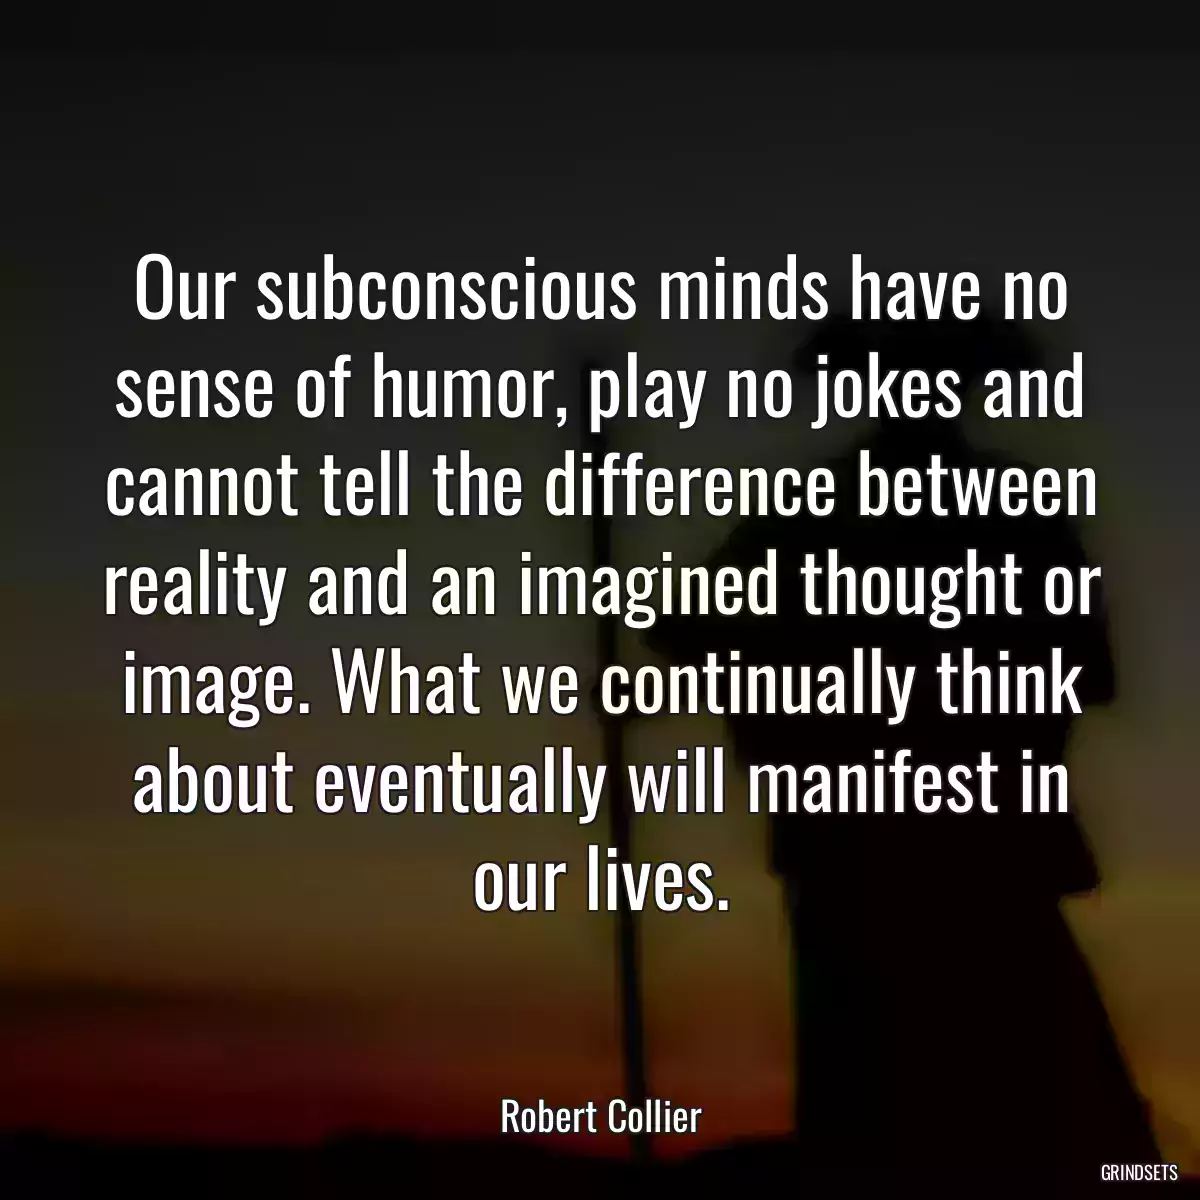 Our subconscious minds have no sense of humor, play no jokes and cannot tell the difference between reality and an imagined thought or image. What we continually think about eventually will manifest in our lives.